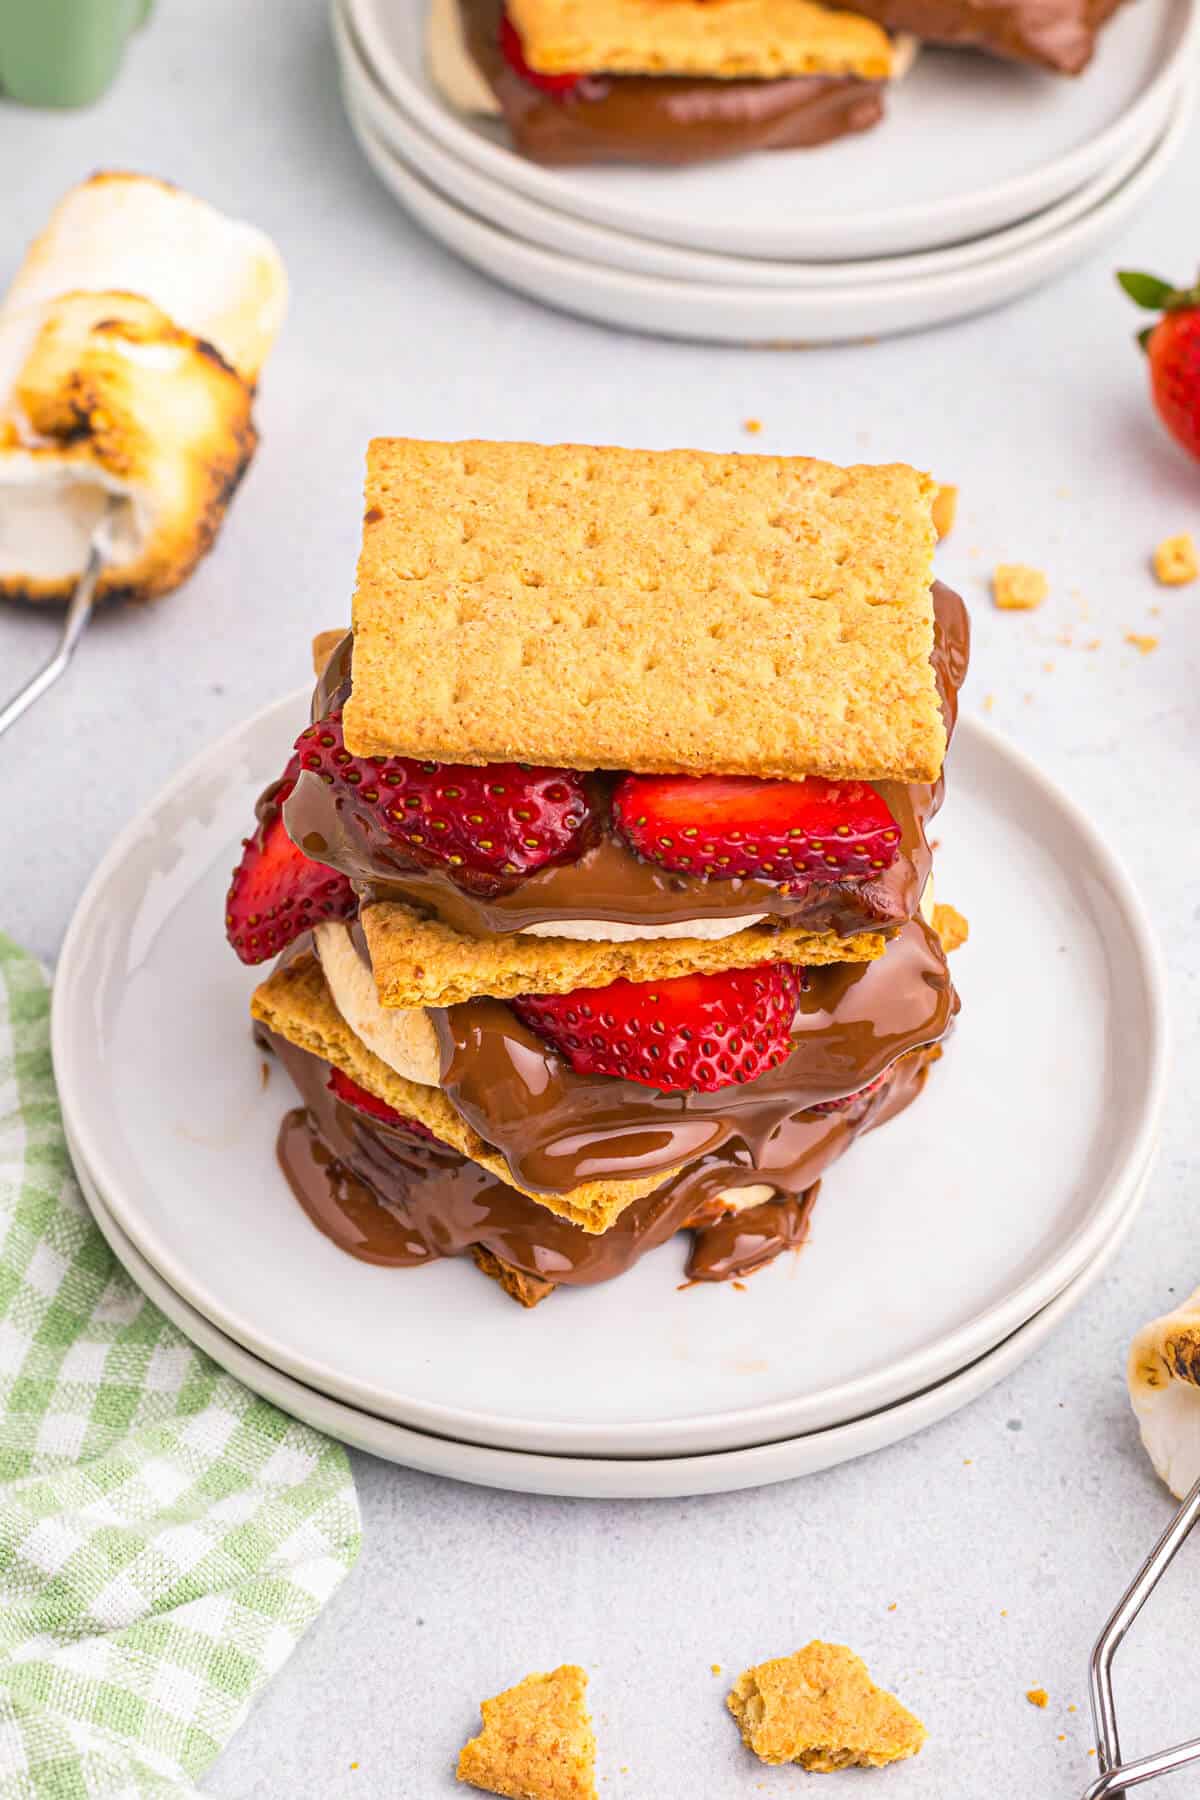 Strawberry s'mores on a plate.